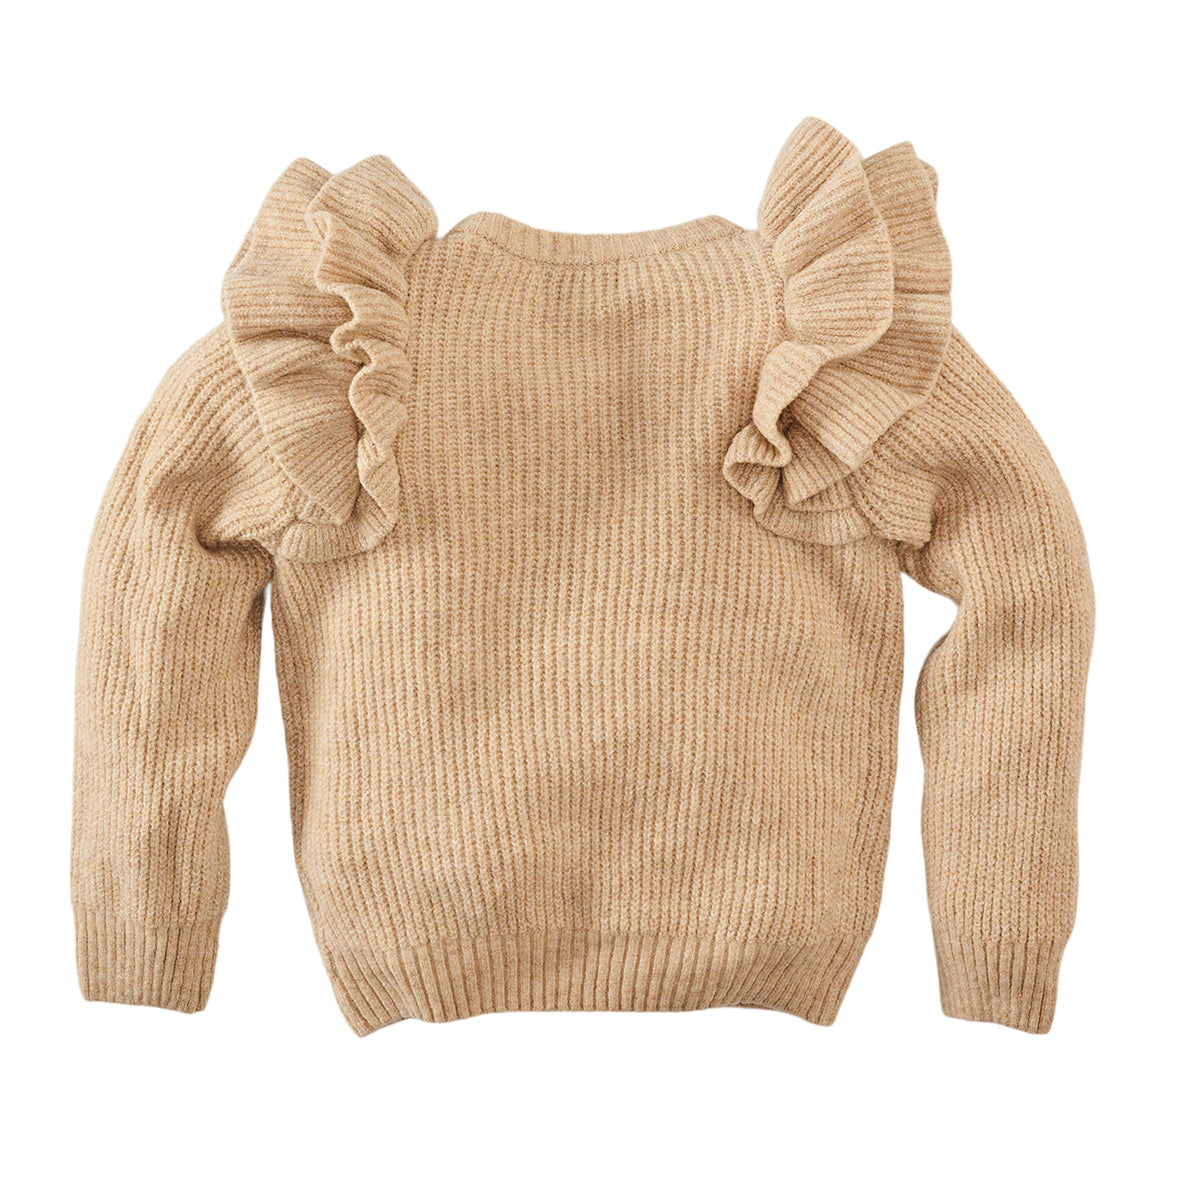 Z8 Knitted Sweater Madia